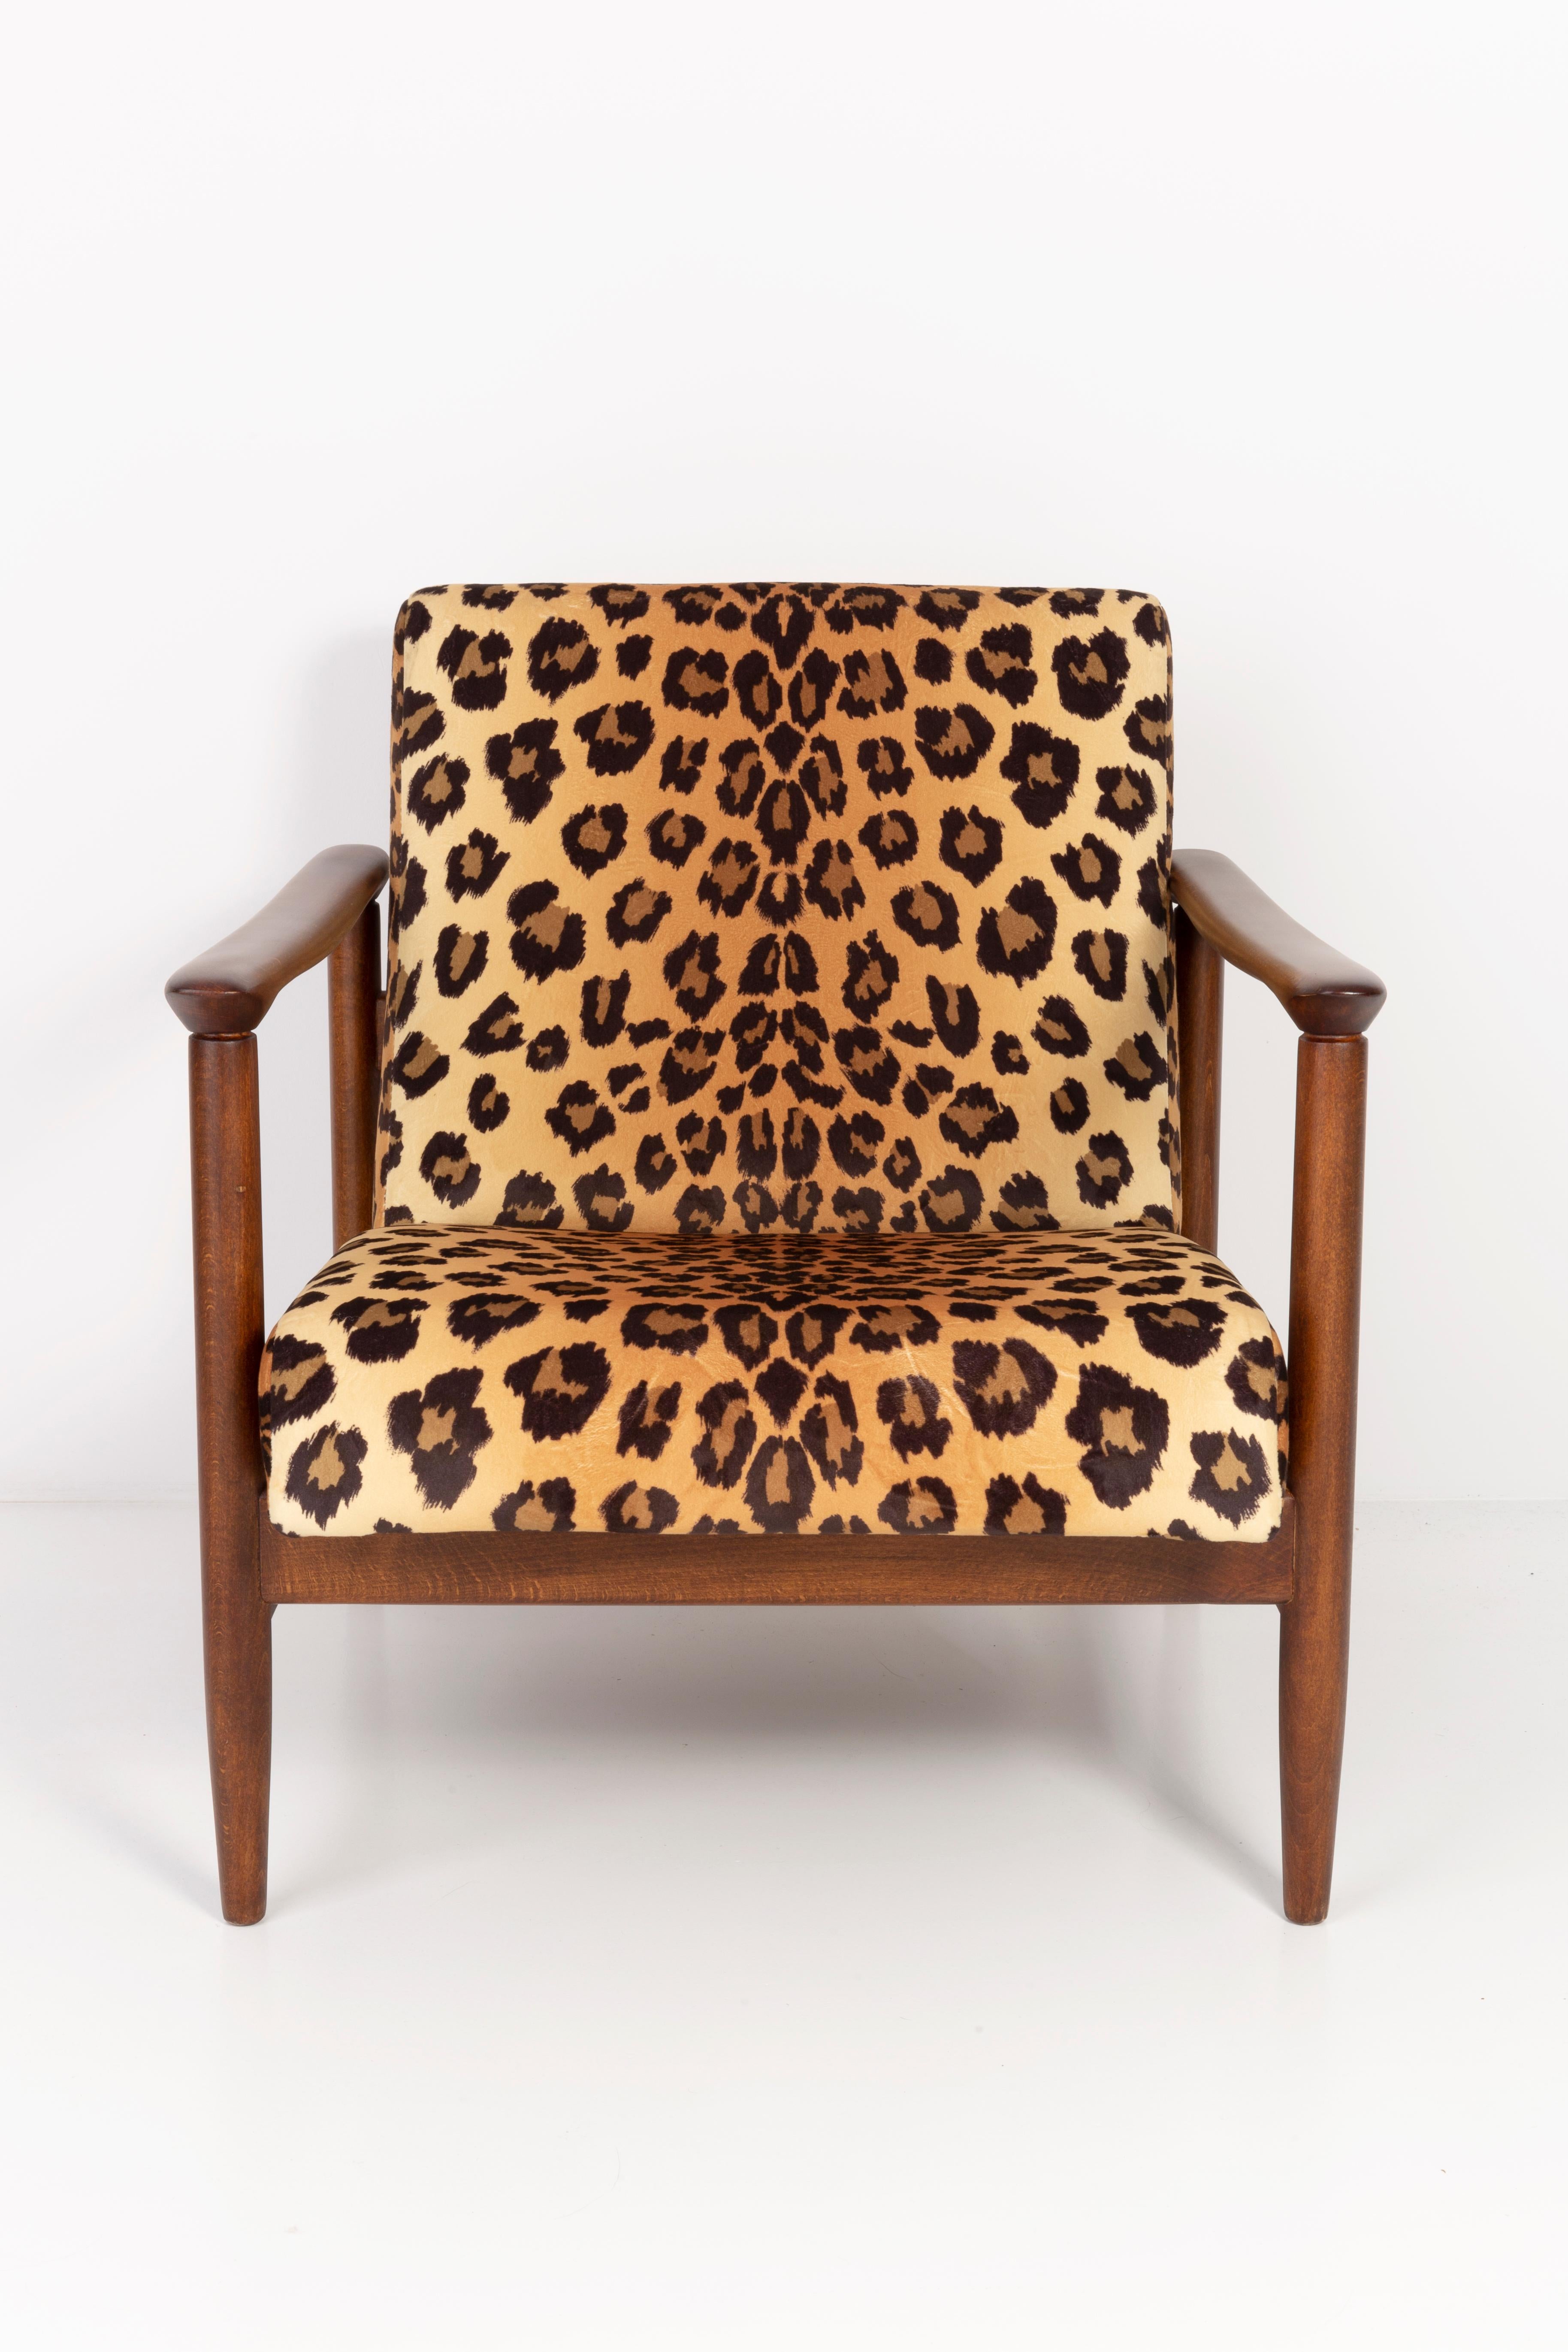 Hand-Crafted Two Leopard Velvet Armchairs, Hollywood Regency, Edmund Homa, 1960s, Poland For Sale